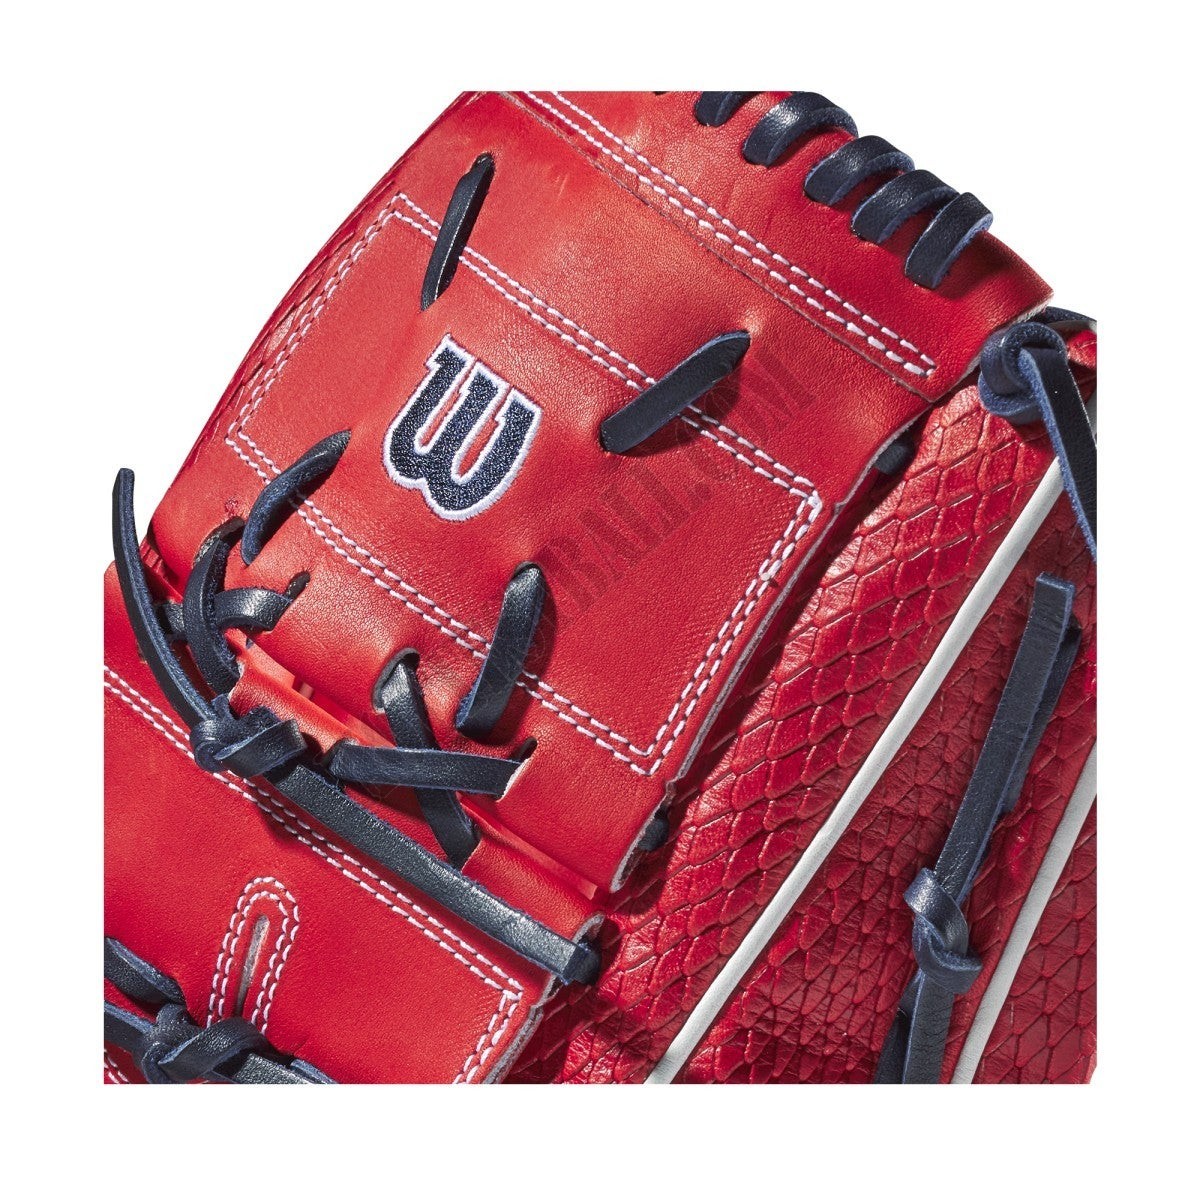 2021 A2000 B125 12.5" Carlos Carrasco Game Model Pitcher's Baseball Glove ● Wilson Promotions - -5